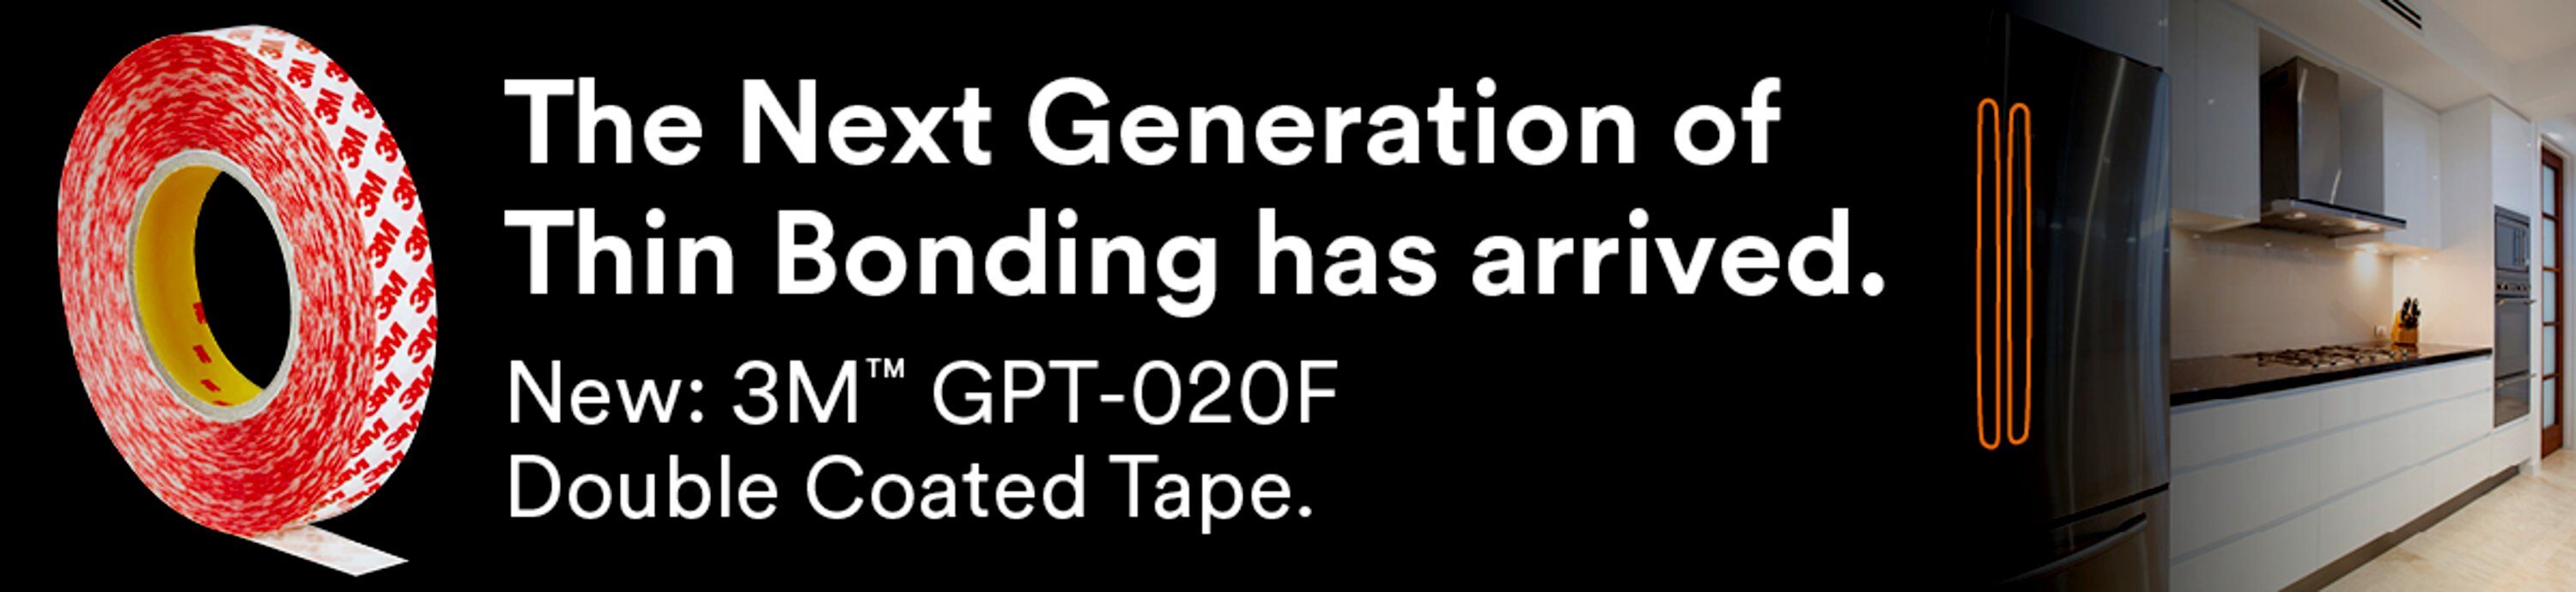 3M™ GPT-020F Double Coated Tape